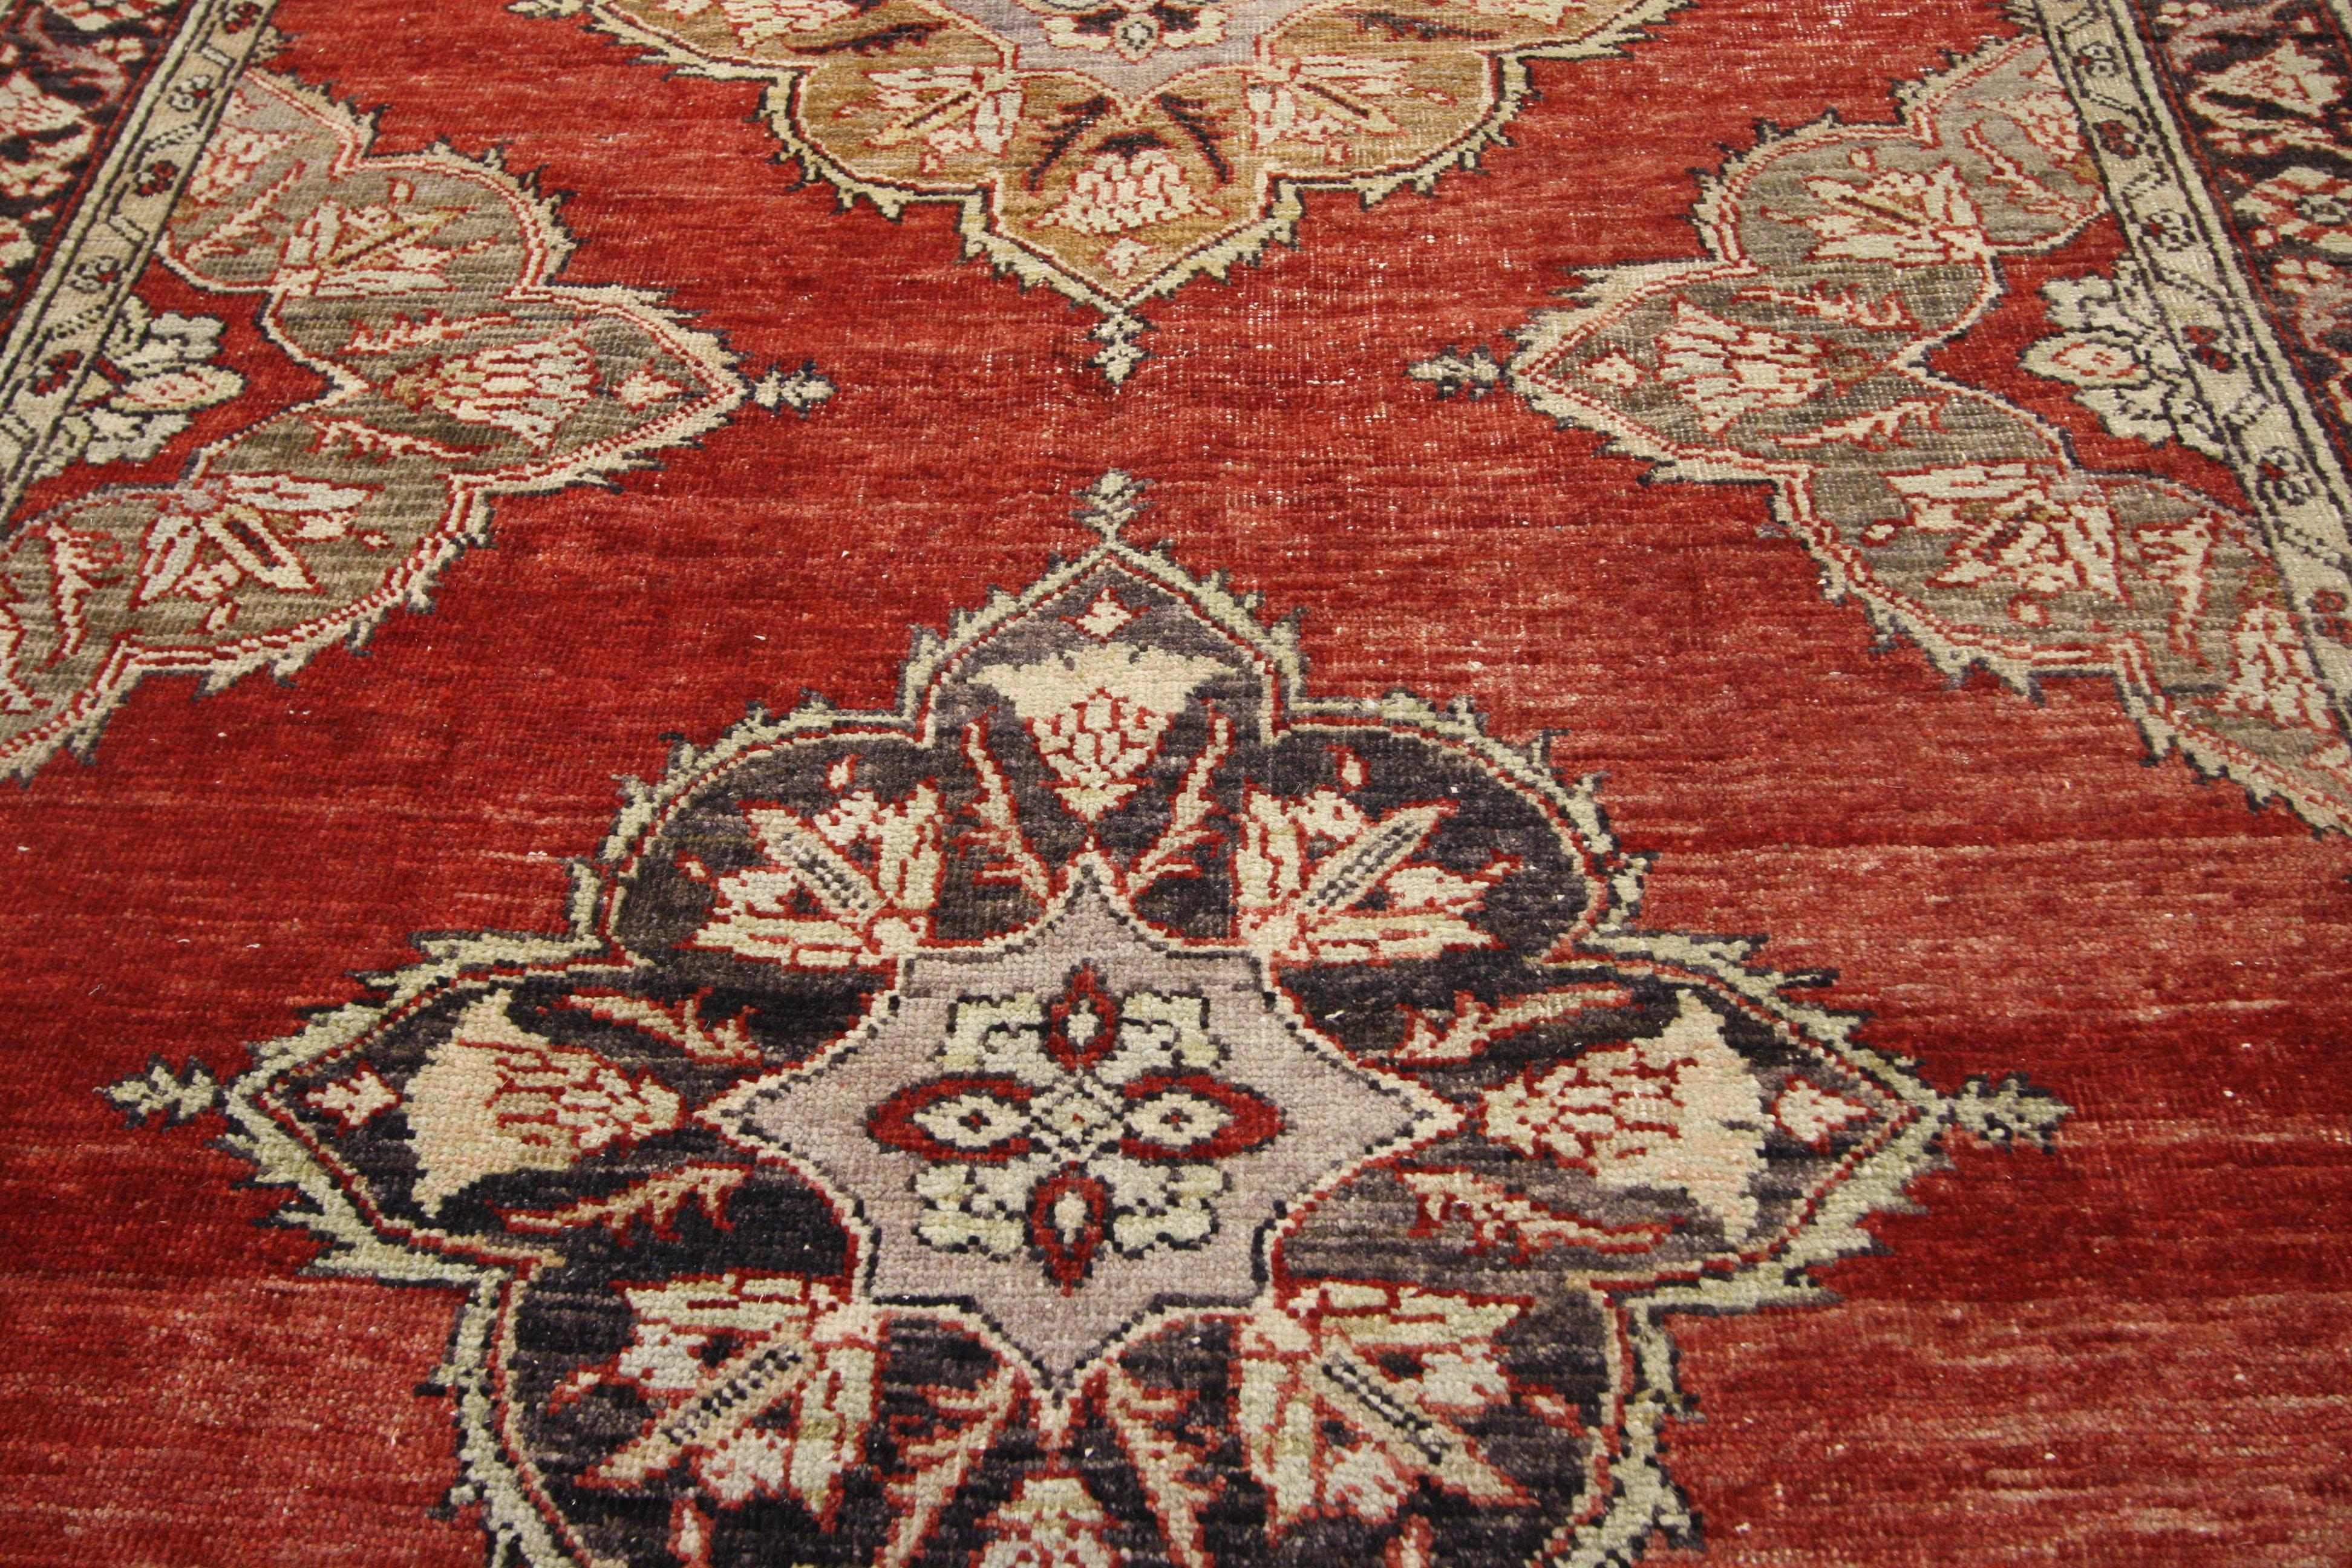 52387 Vintage Turkish Oushak Gallery Rug, Wide Hallway Runner 04'11 x 13'06. This hand knotted wool vintage Turkish Oushak runner features five floral lobed diamond-shaped medallions spread across an abrashed red field. The petal-shaped lobes of the